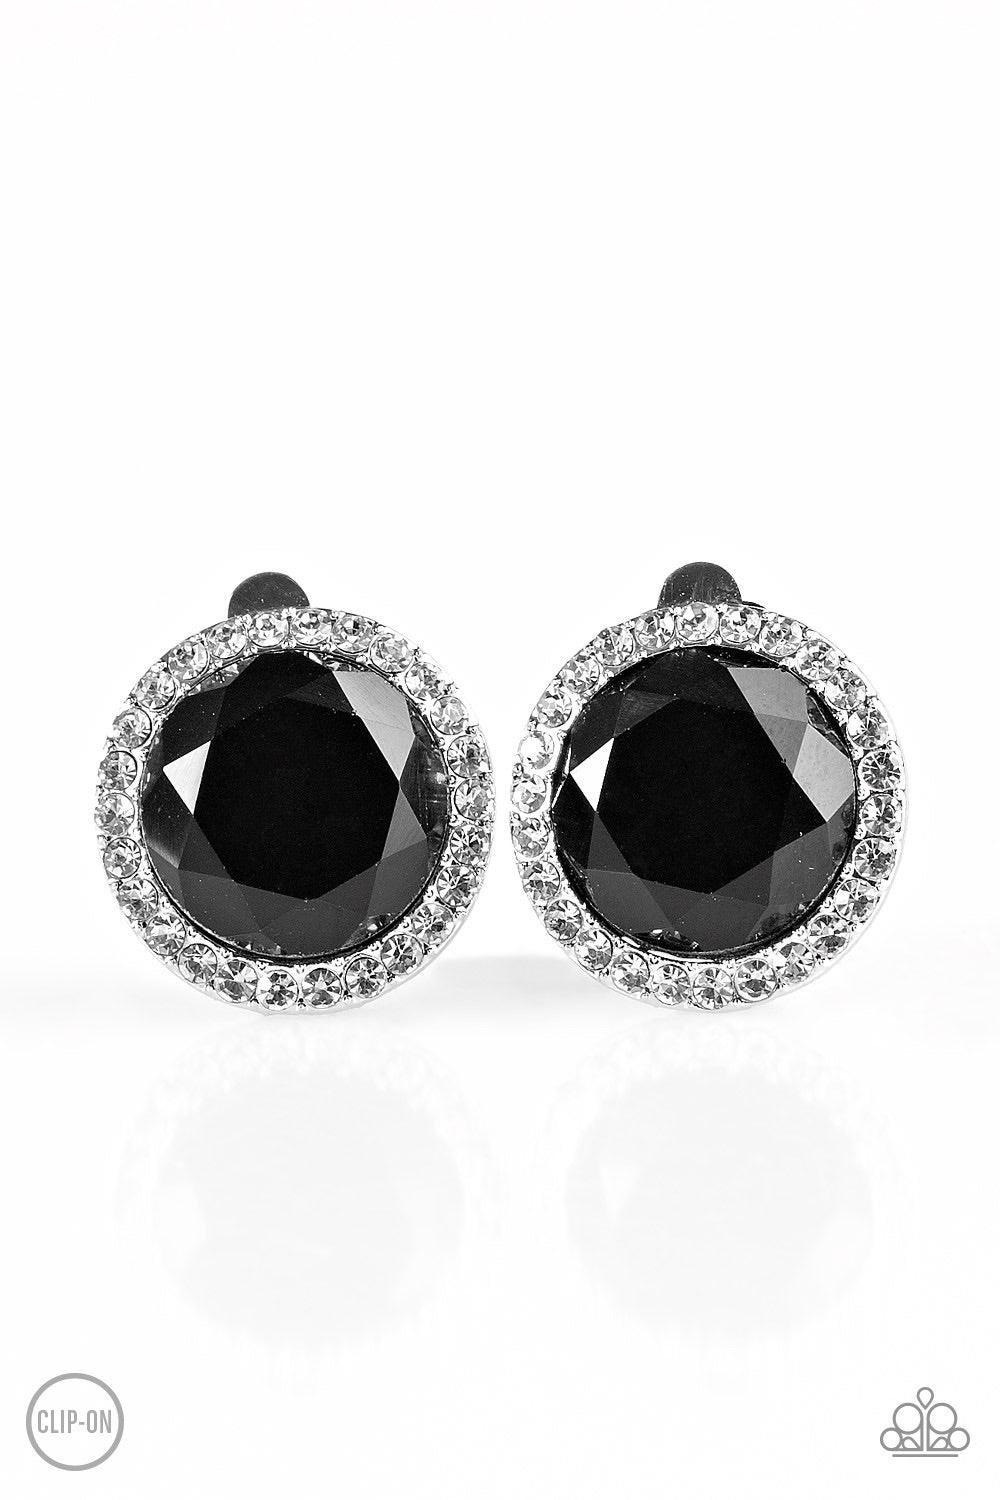 Paparazzi Accessories Positively Princess ~Black *Clip-On A glassy black gem is pressed into the center of a white rhinestone encrusted frame for a timeless look. Earring attaches to a standard clip-on fitting.